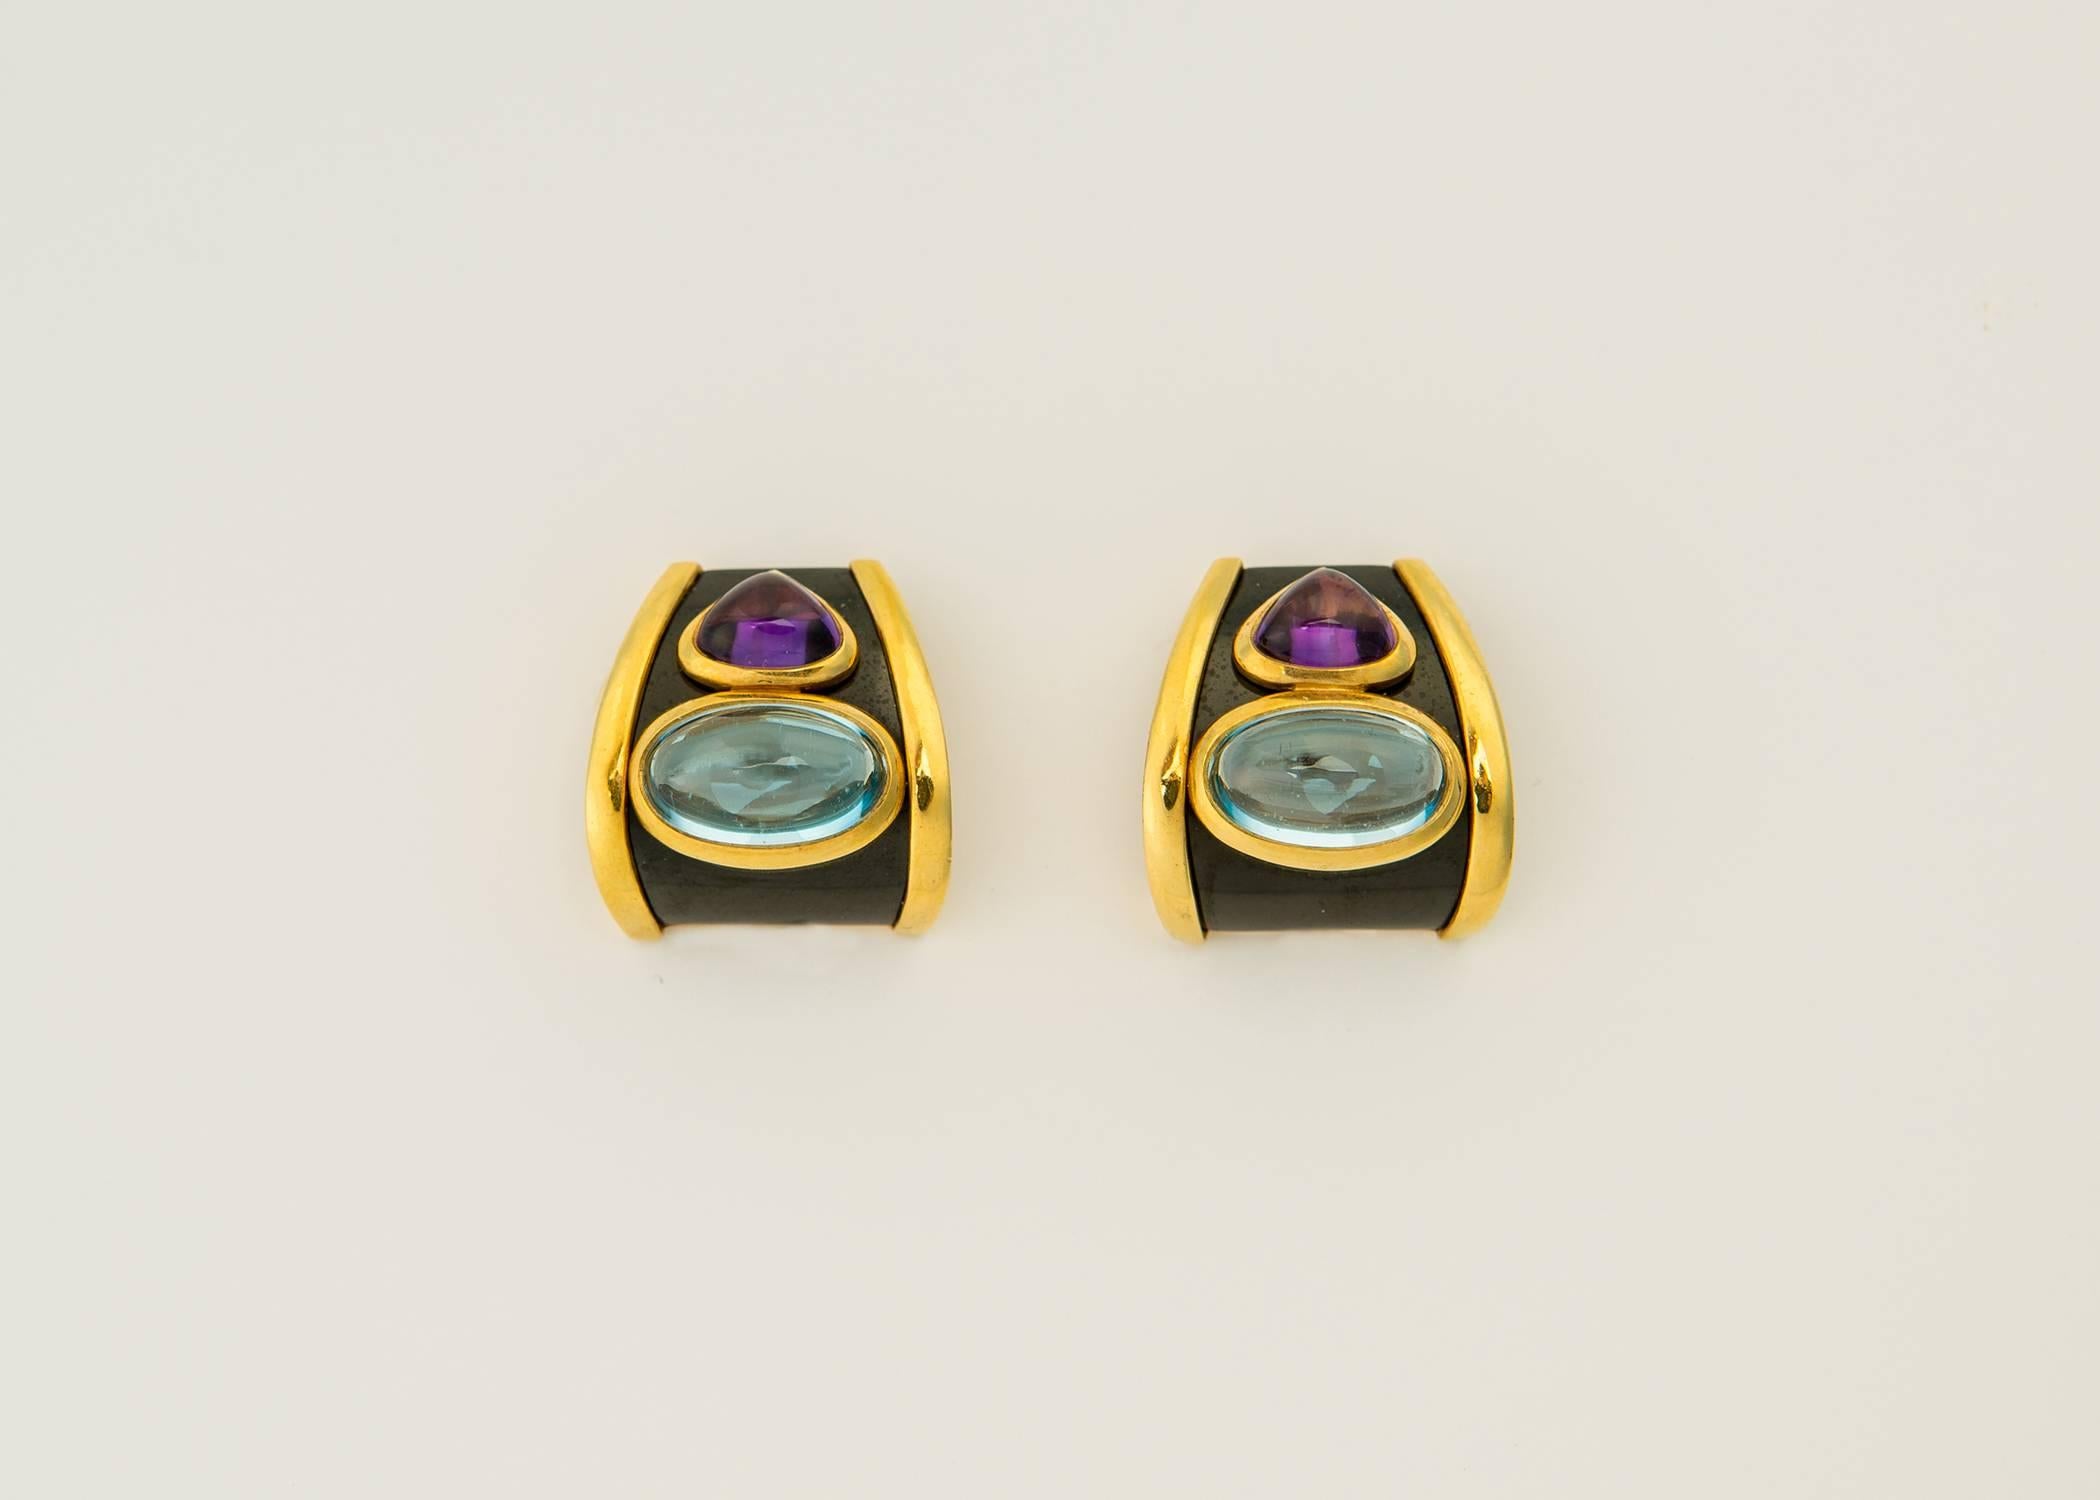 Bulgari granddaughter Marina B at her best. Vivid amethyst and blue topaz are set against black onyx and framed with rich 18k gold. Simply Chic. 7/8's of an inch in size.